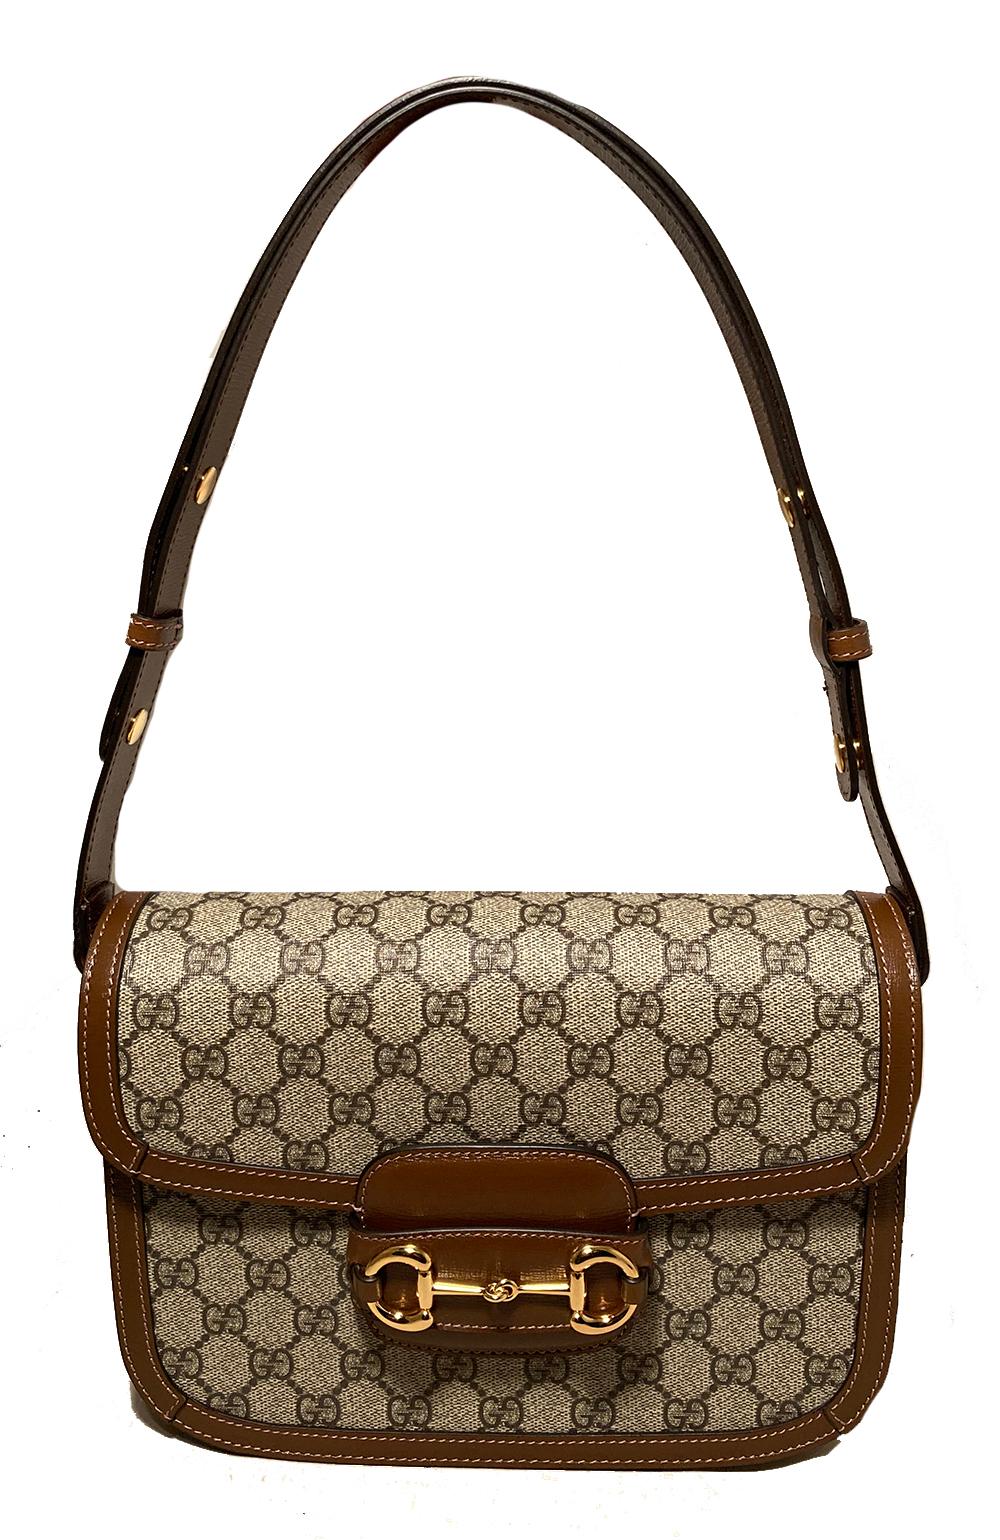 Gucci Monogram Horsebit 1955 Shoulder Bag in NWOT condition. Signature monogram canvas exterior trimmed with brown leather and gold hardware. Timeless horsebit hardware along front closure. Top flap opens to a beige suede lined interior with 3